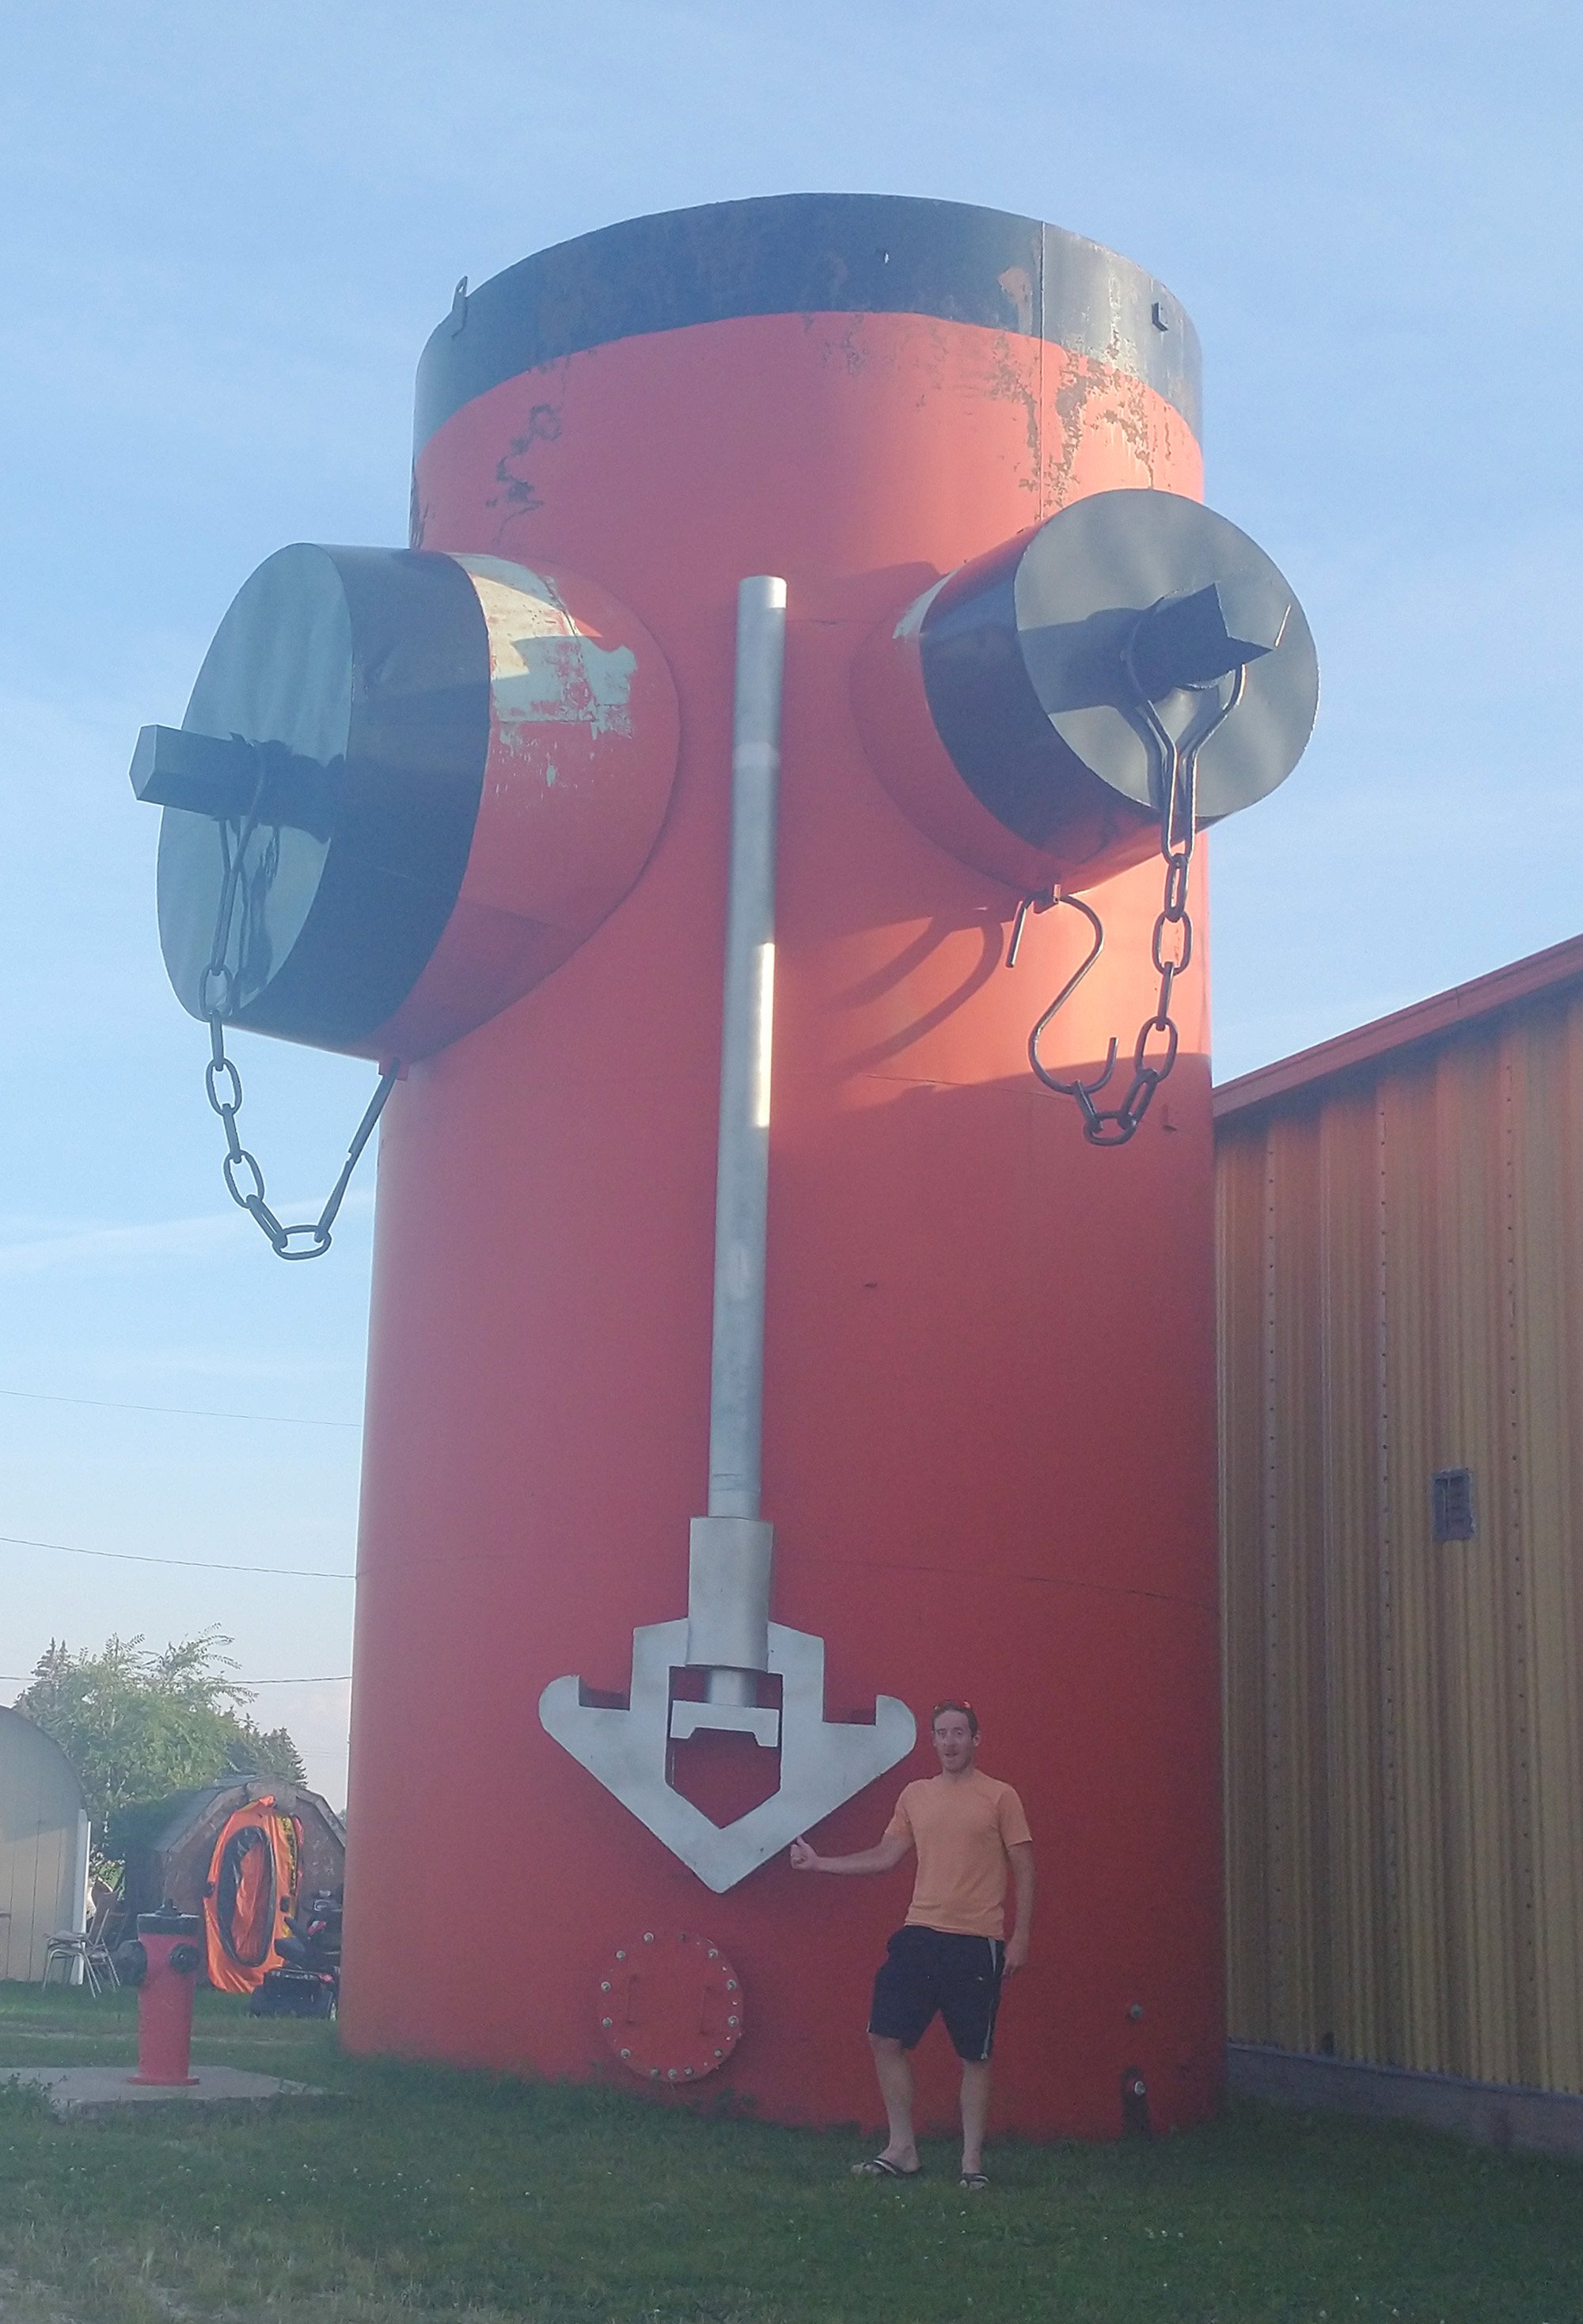 Largest ( non-functional ) fire hydrant. There's a largest FUNCTIONAL one in the USA.